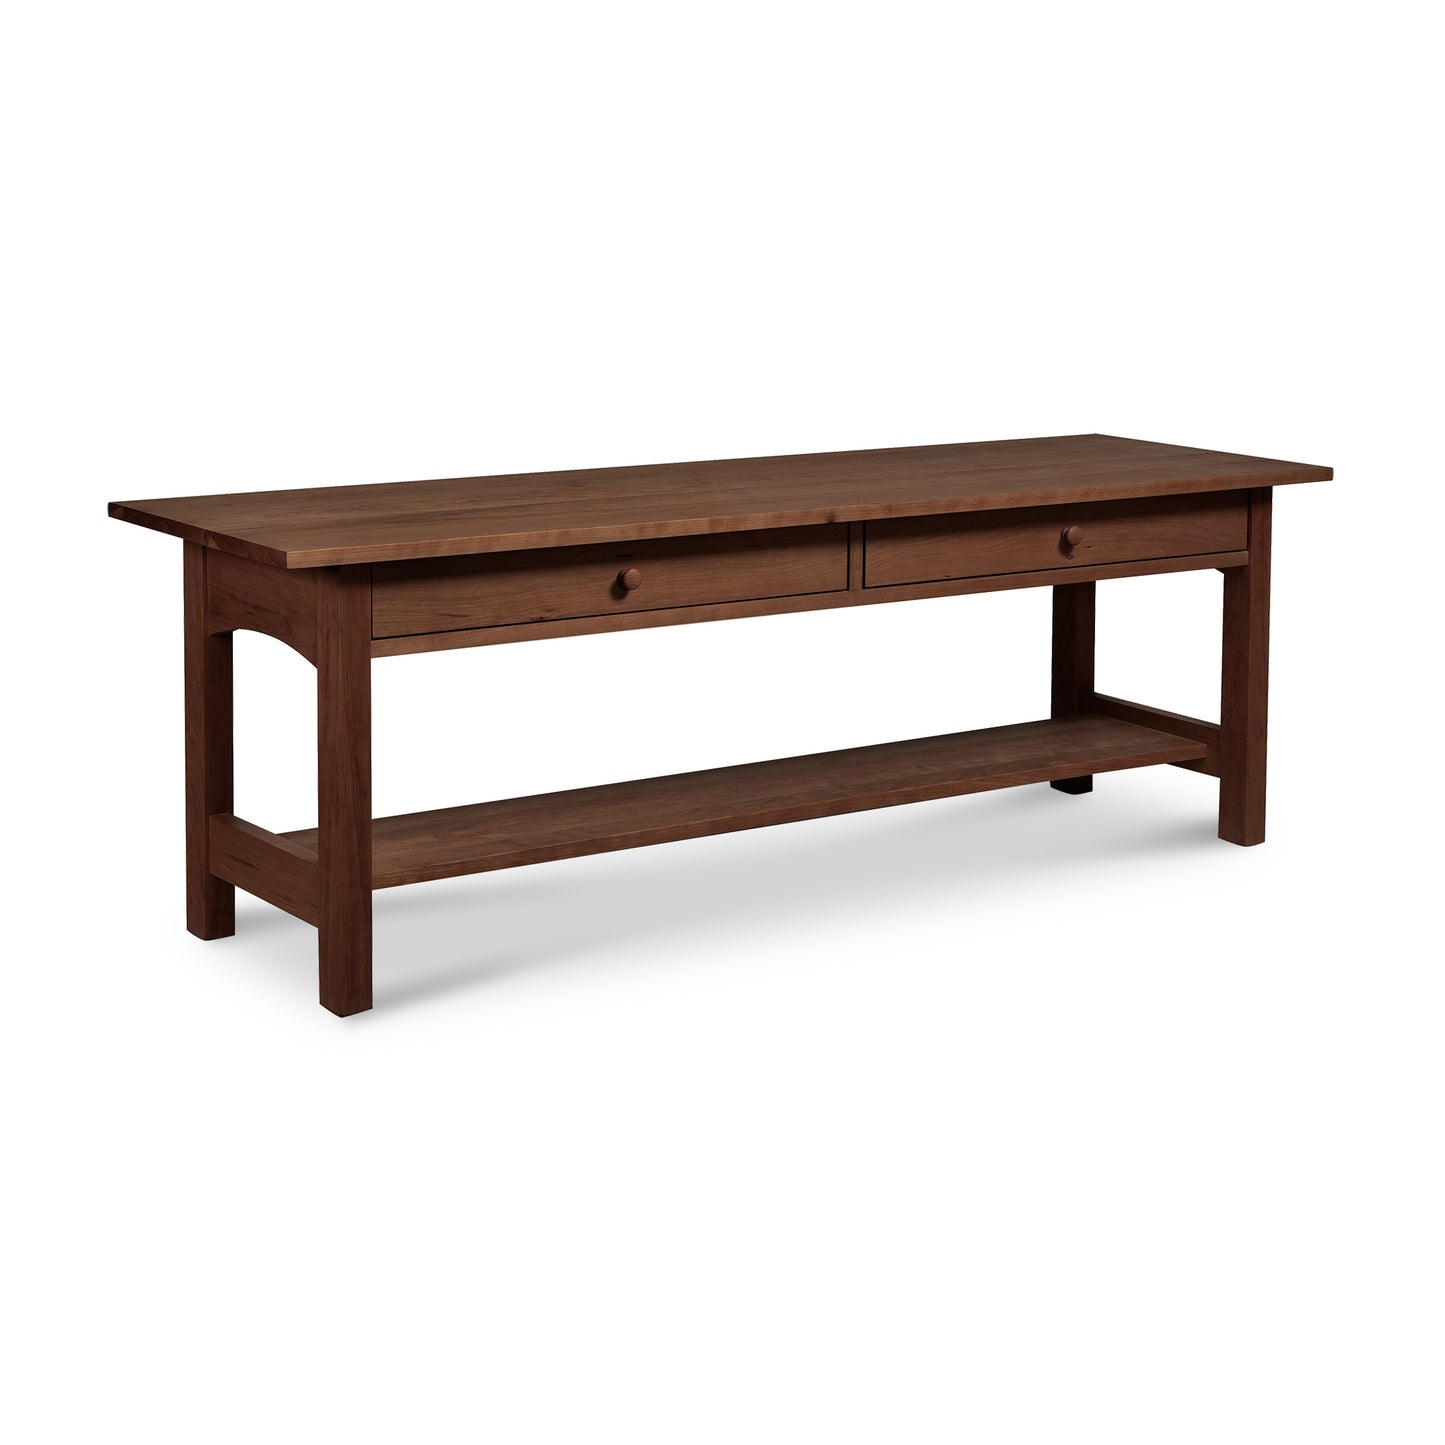 An eco-friendly Burlington Shaker 2-Drawer Coffee Table with a lower shelf, isolated on a white background. Made by Vermont Furniture Designs.